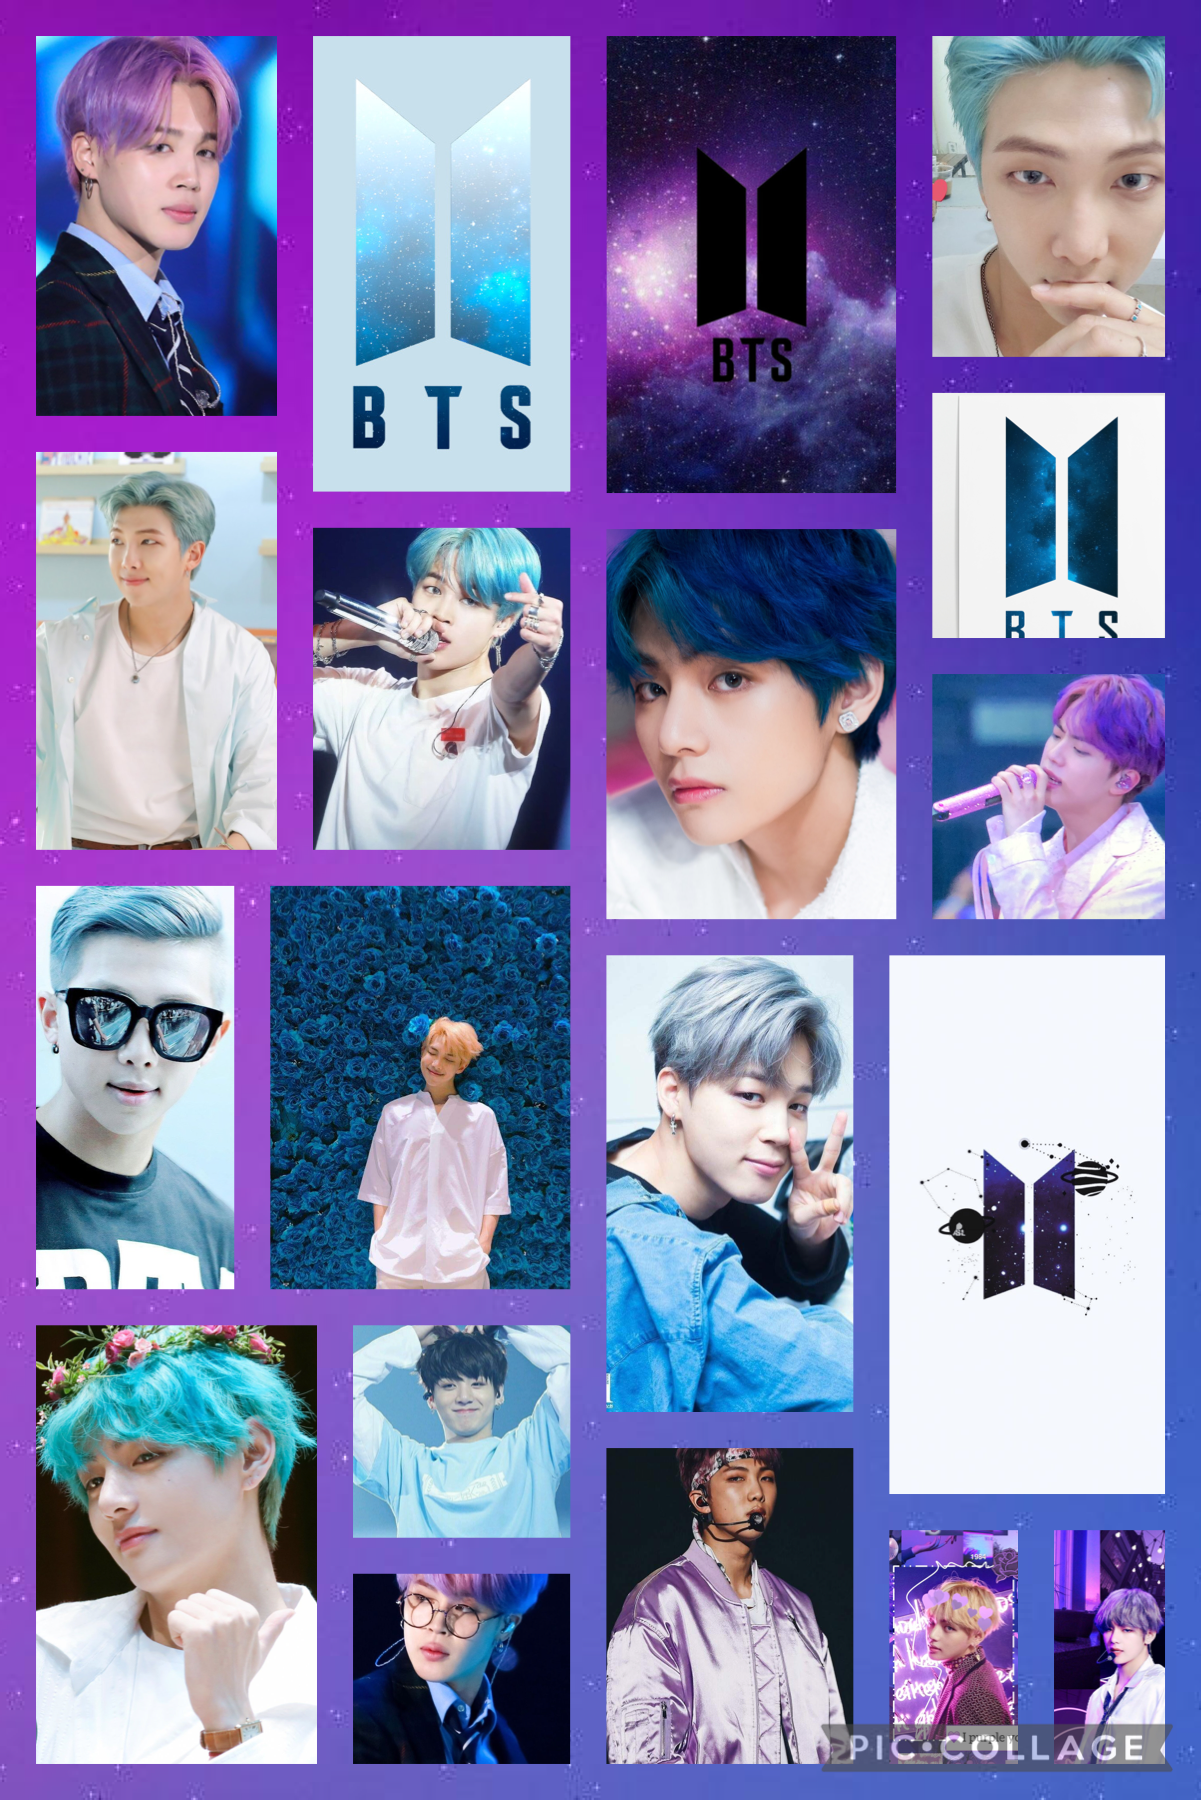 Like and follow if you love BTS